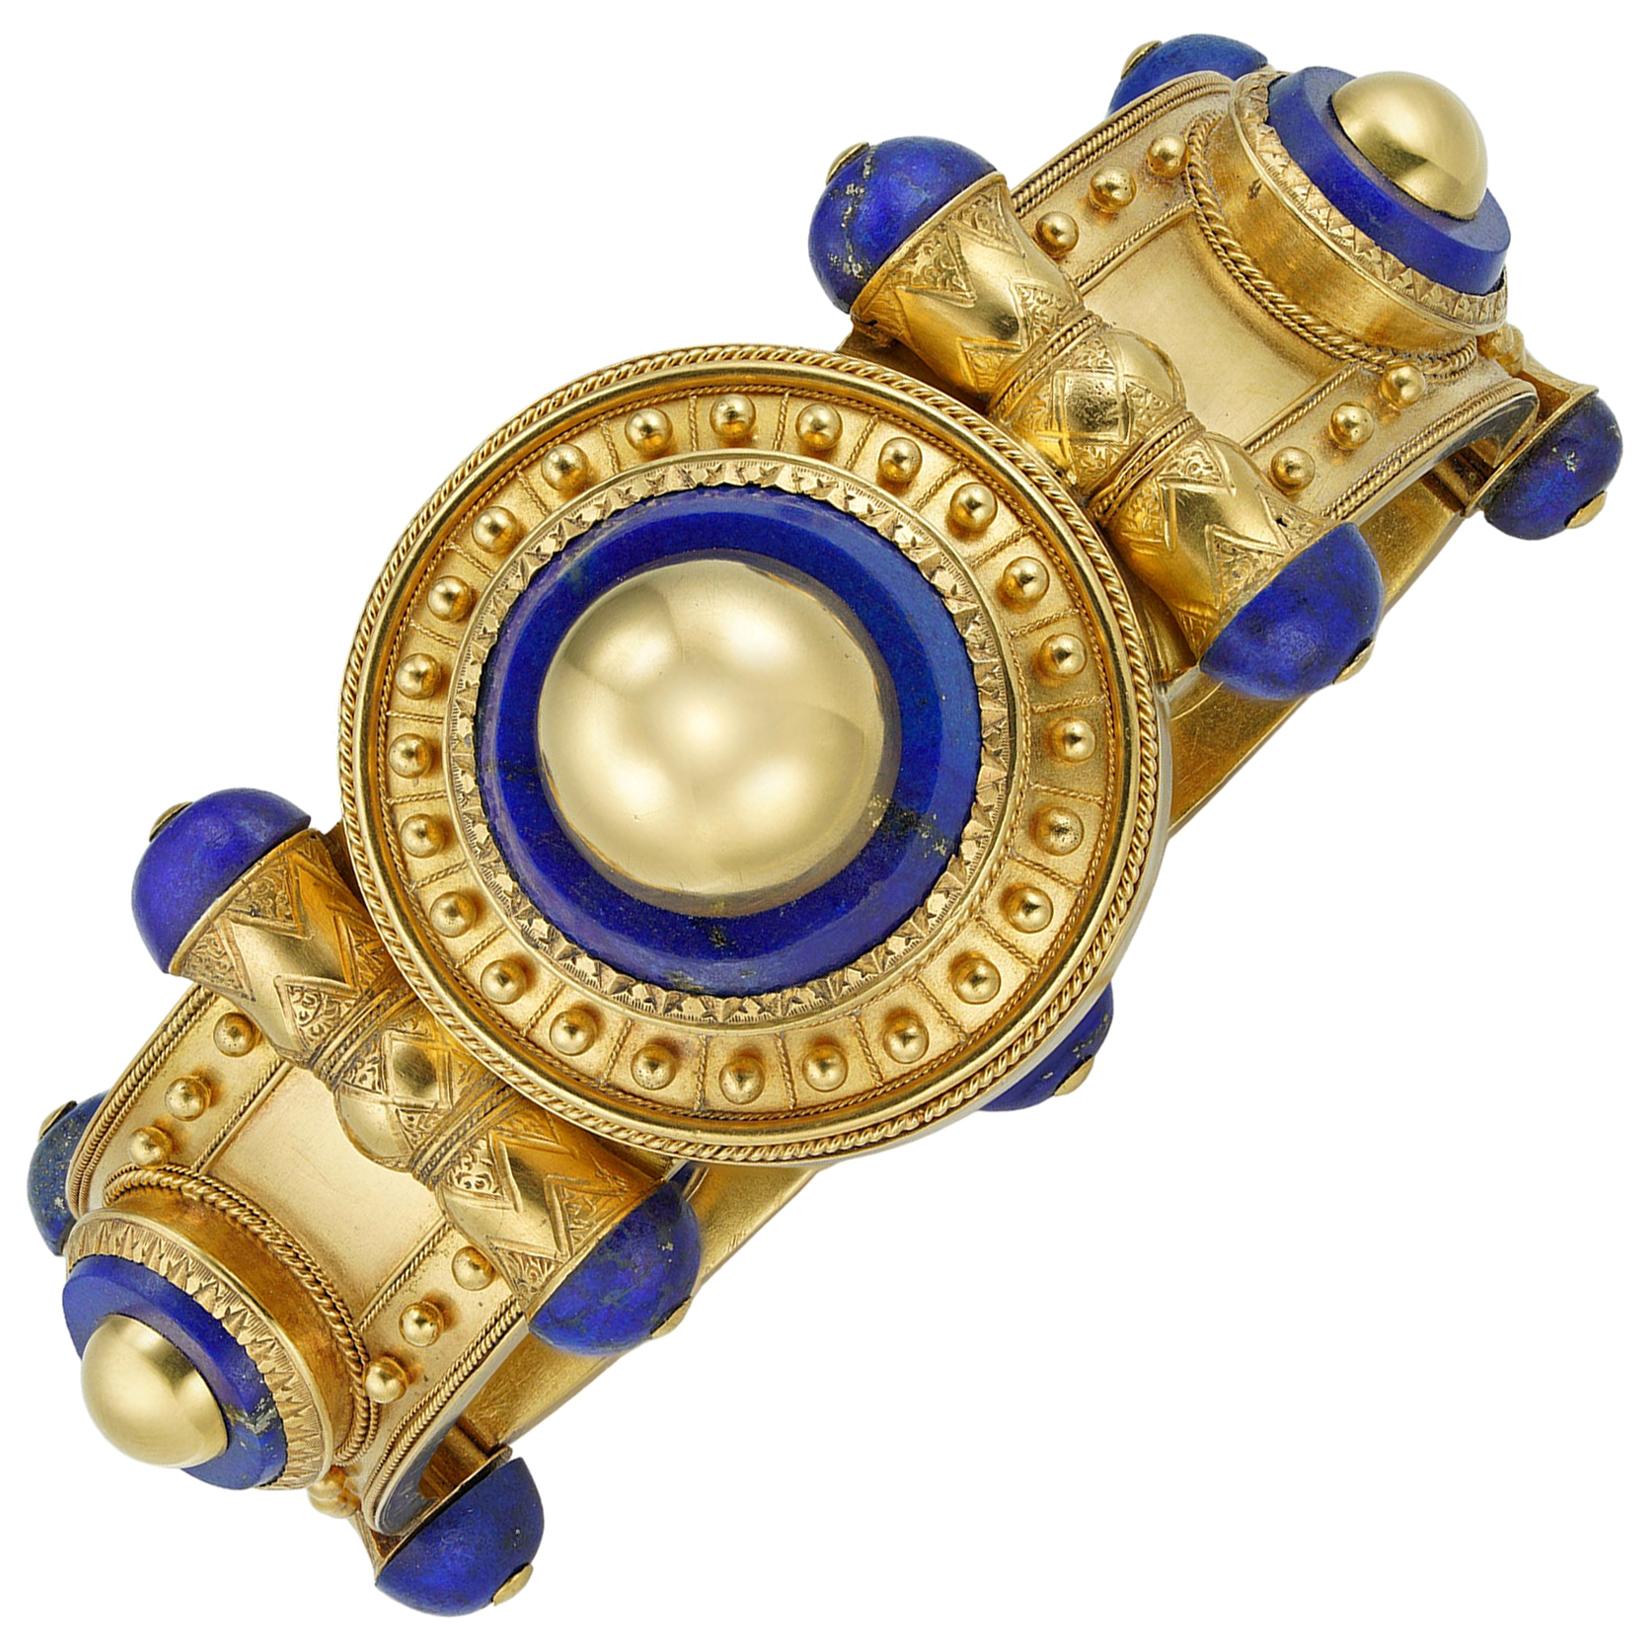 Important Gold and Lapis Bangle by Cartier